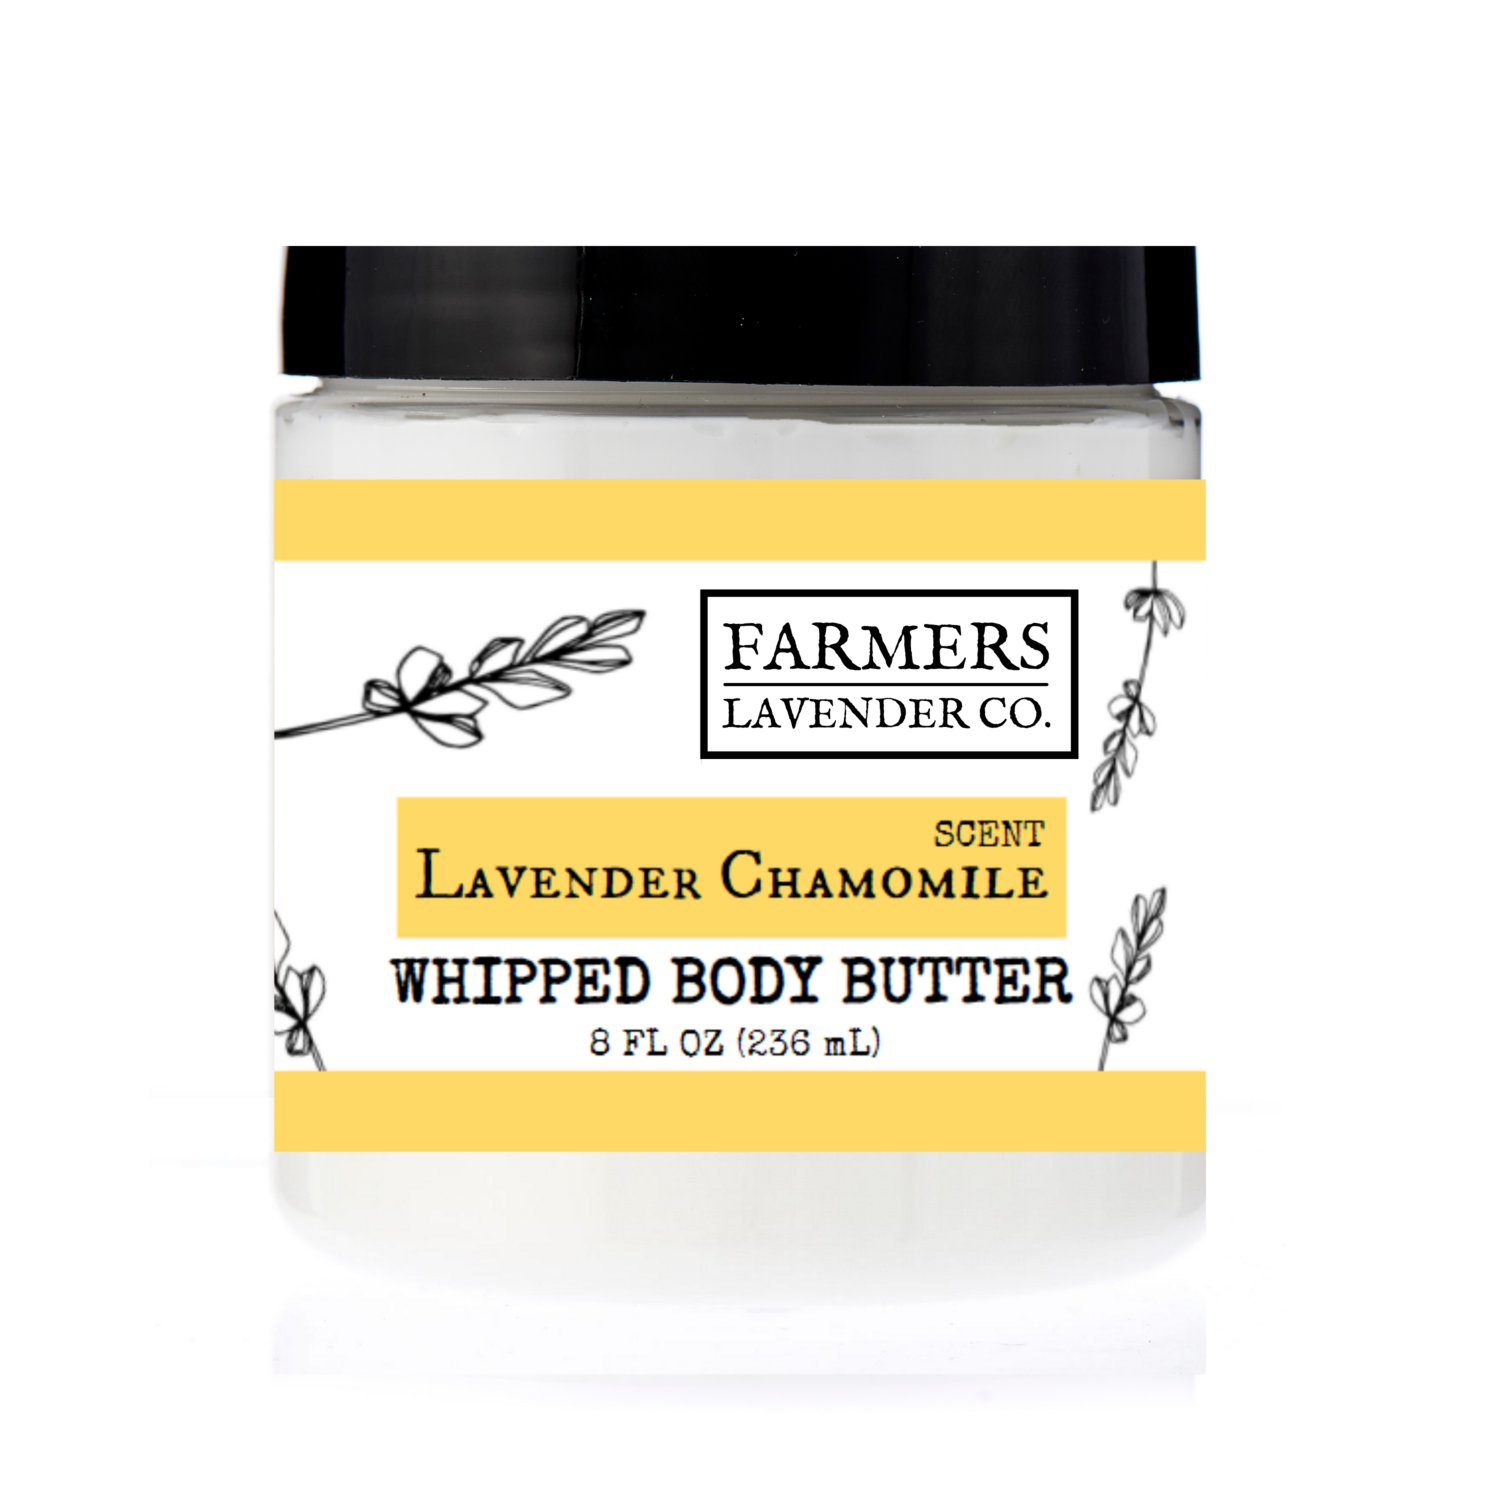 Whipped Body Butter- Lavender Chamomile